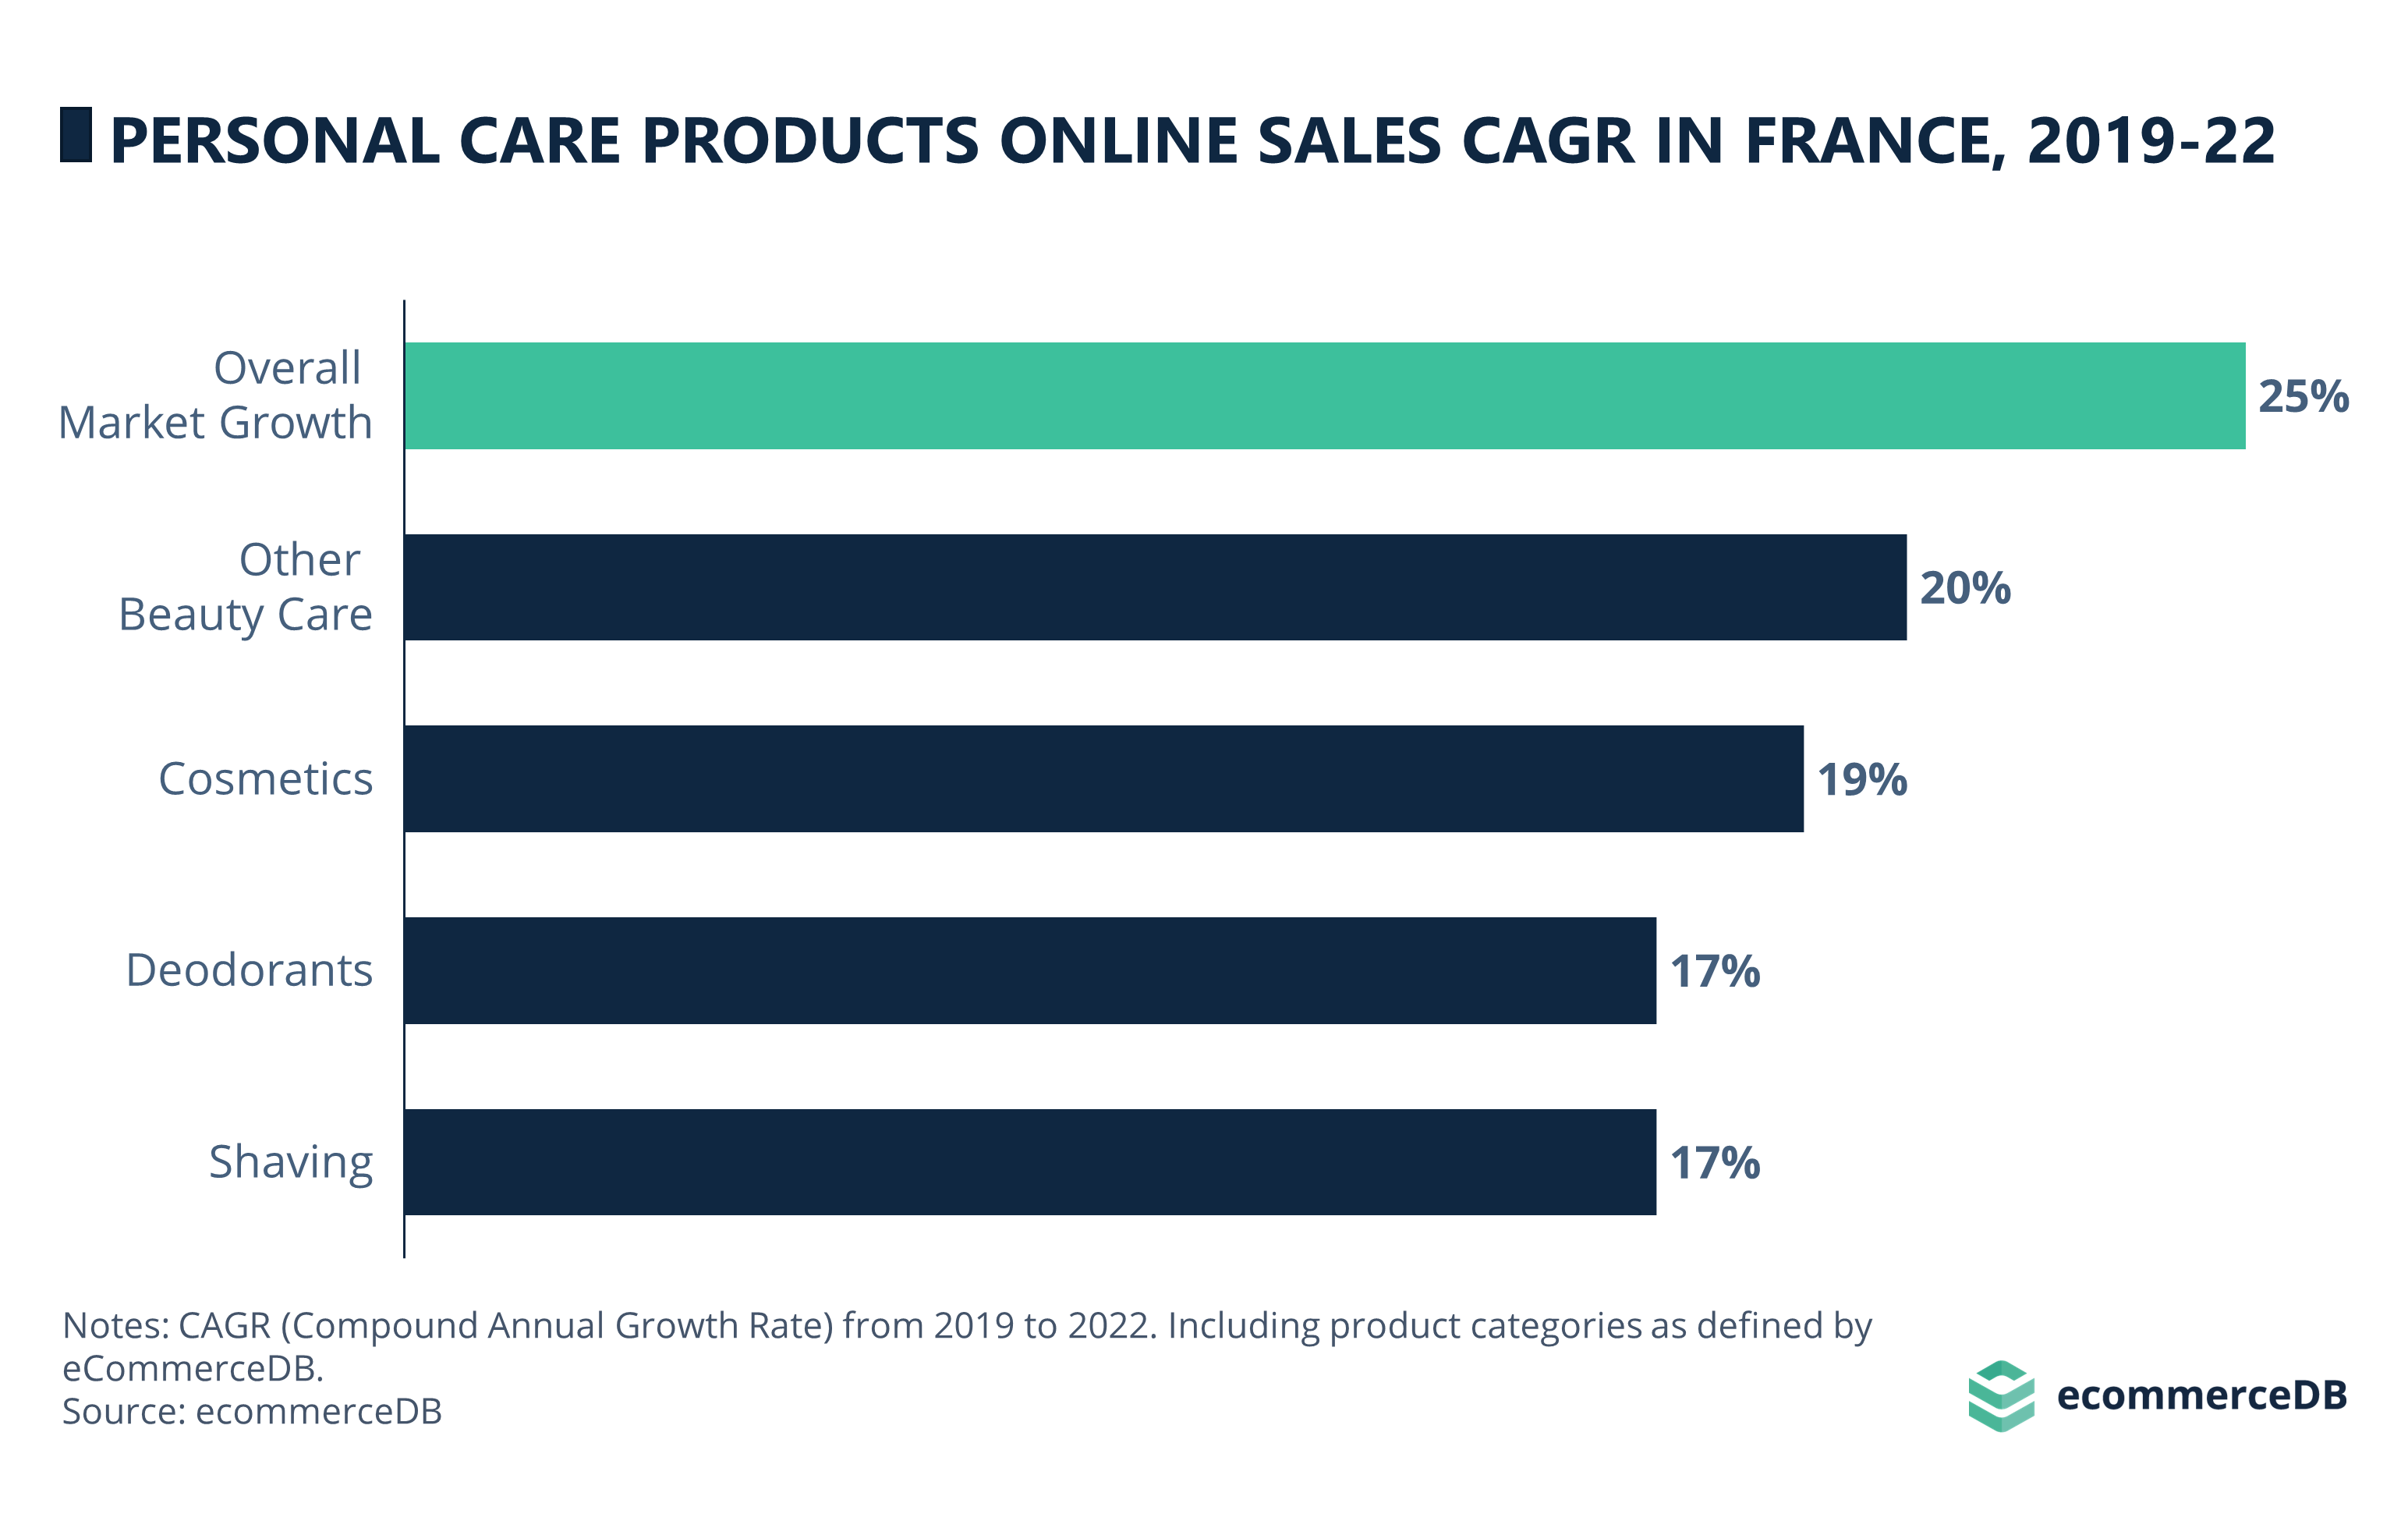 Personal Care Products Online Sales CAGR (19-22) France.